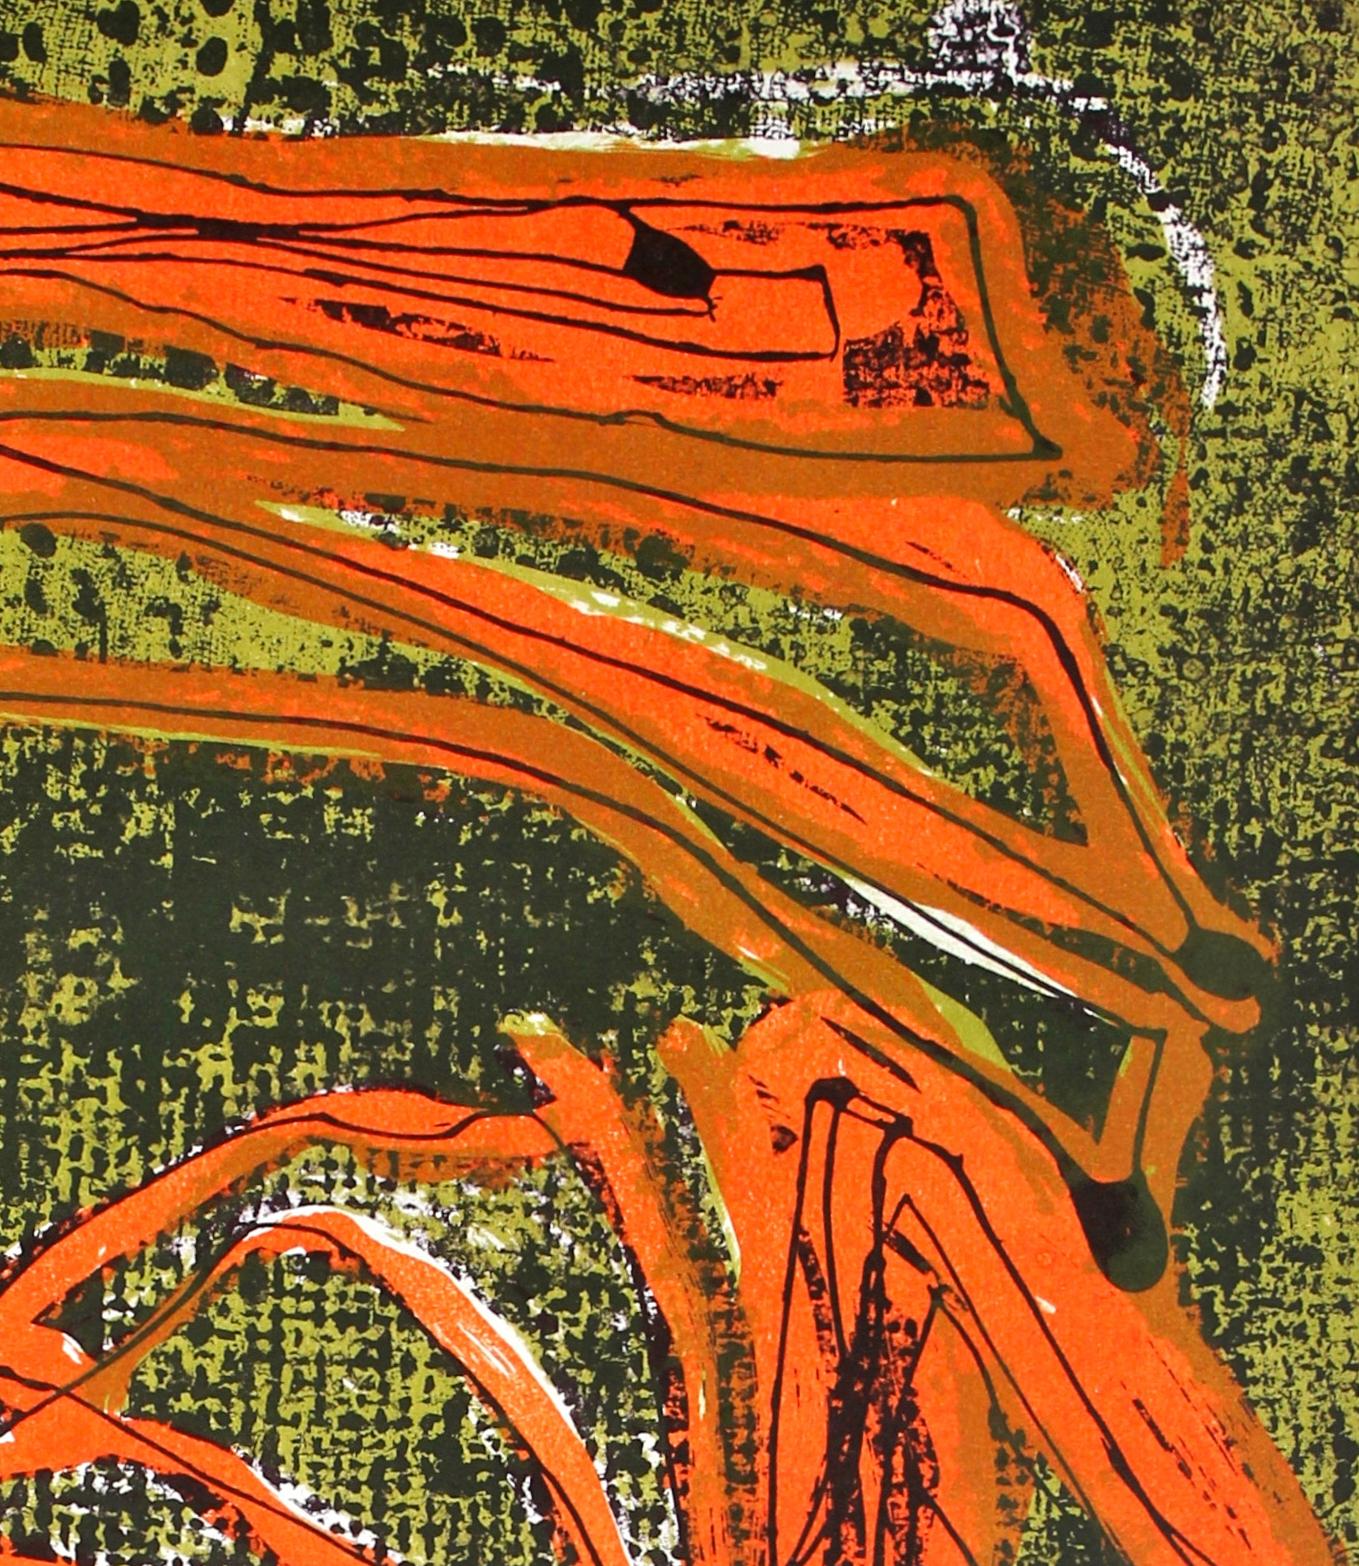 Modernist Abstract Lithograph in Orange and Green, Circa 1950s - Brown Abstract Print by Jerry Opper